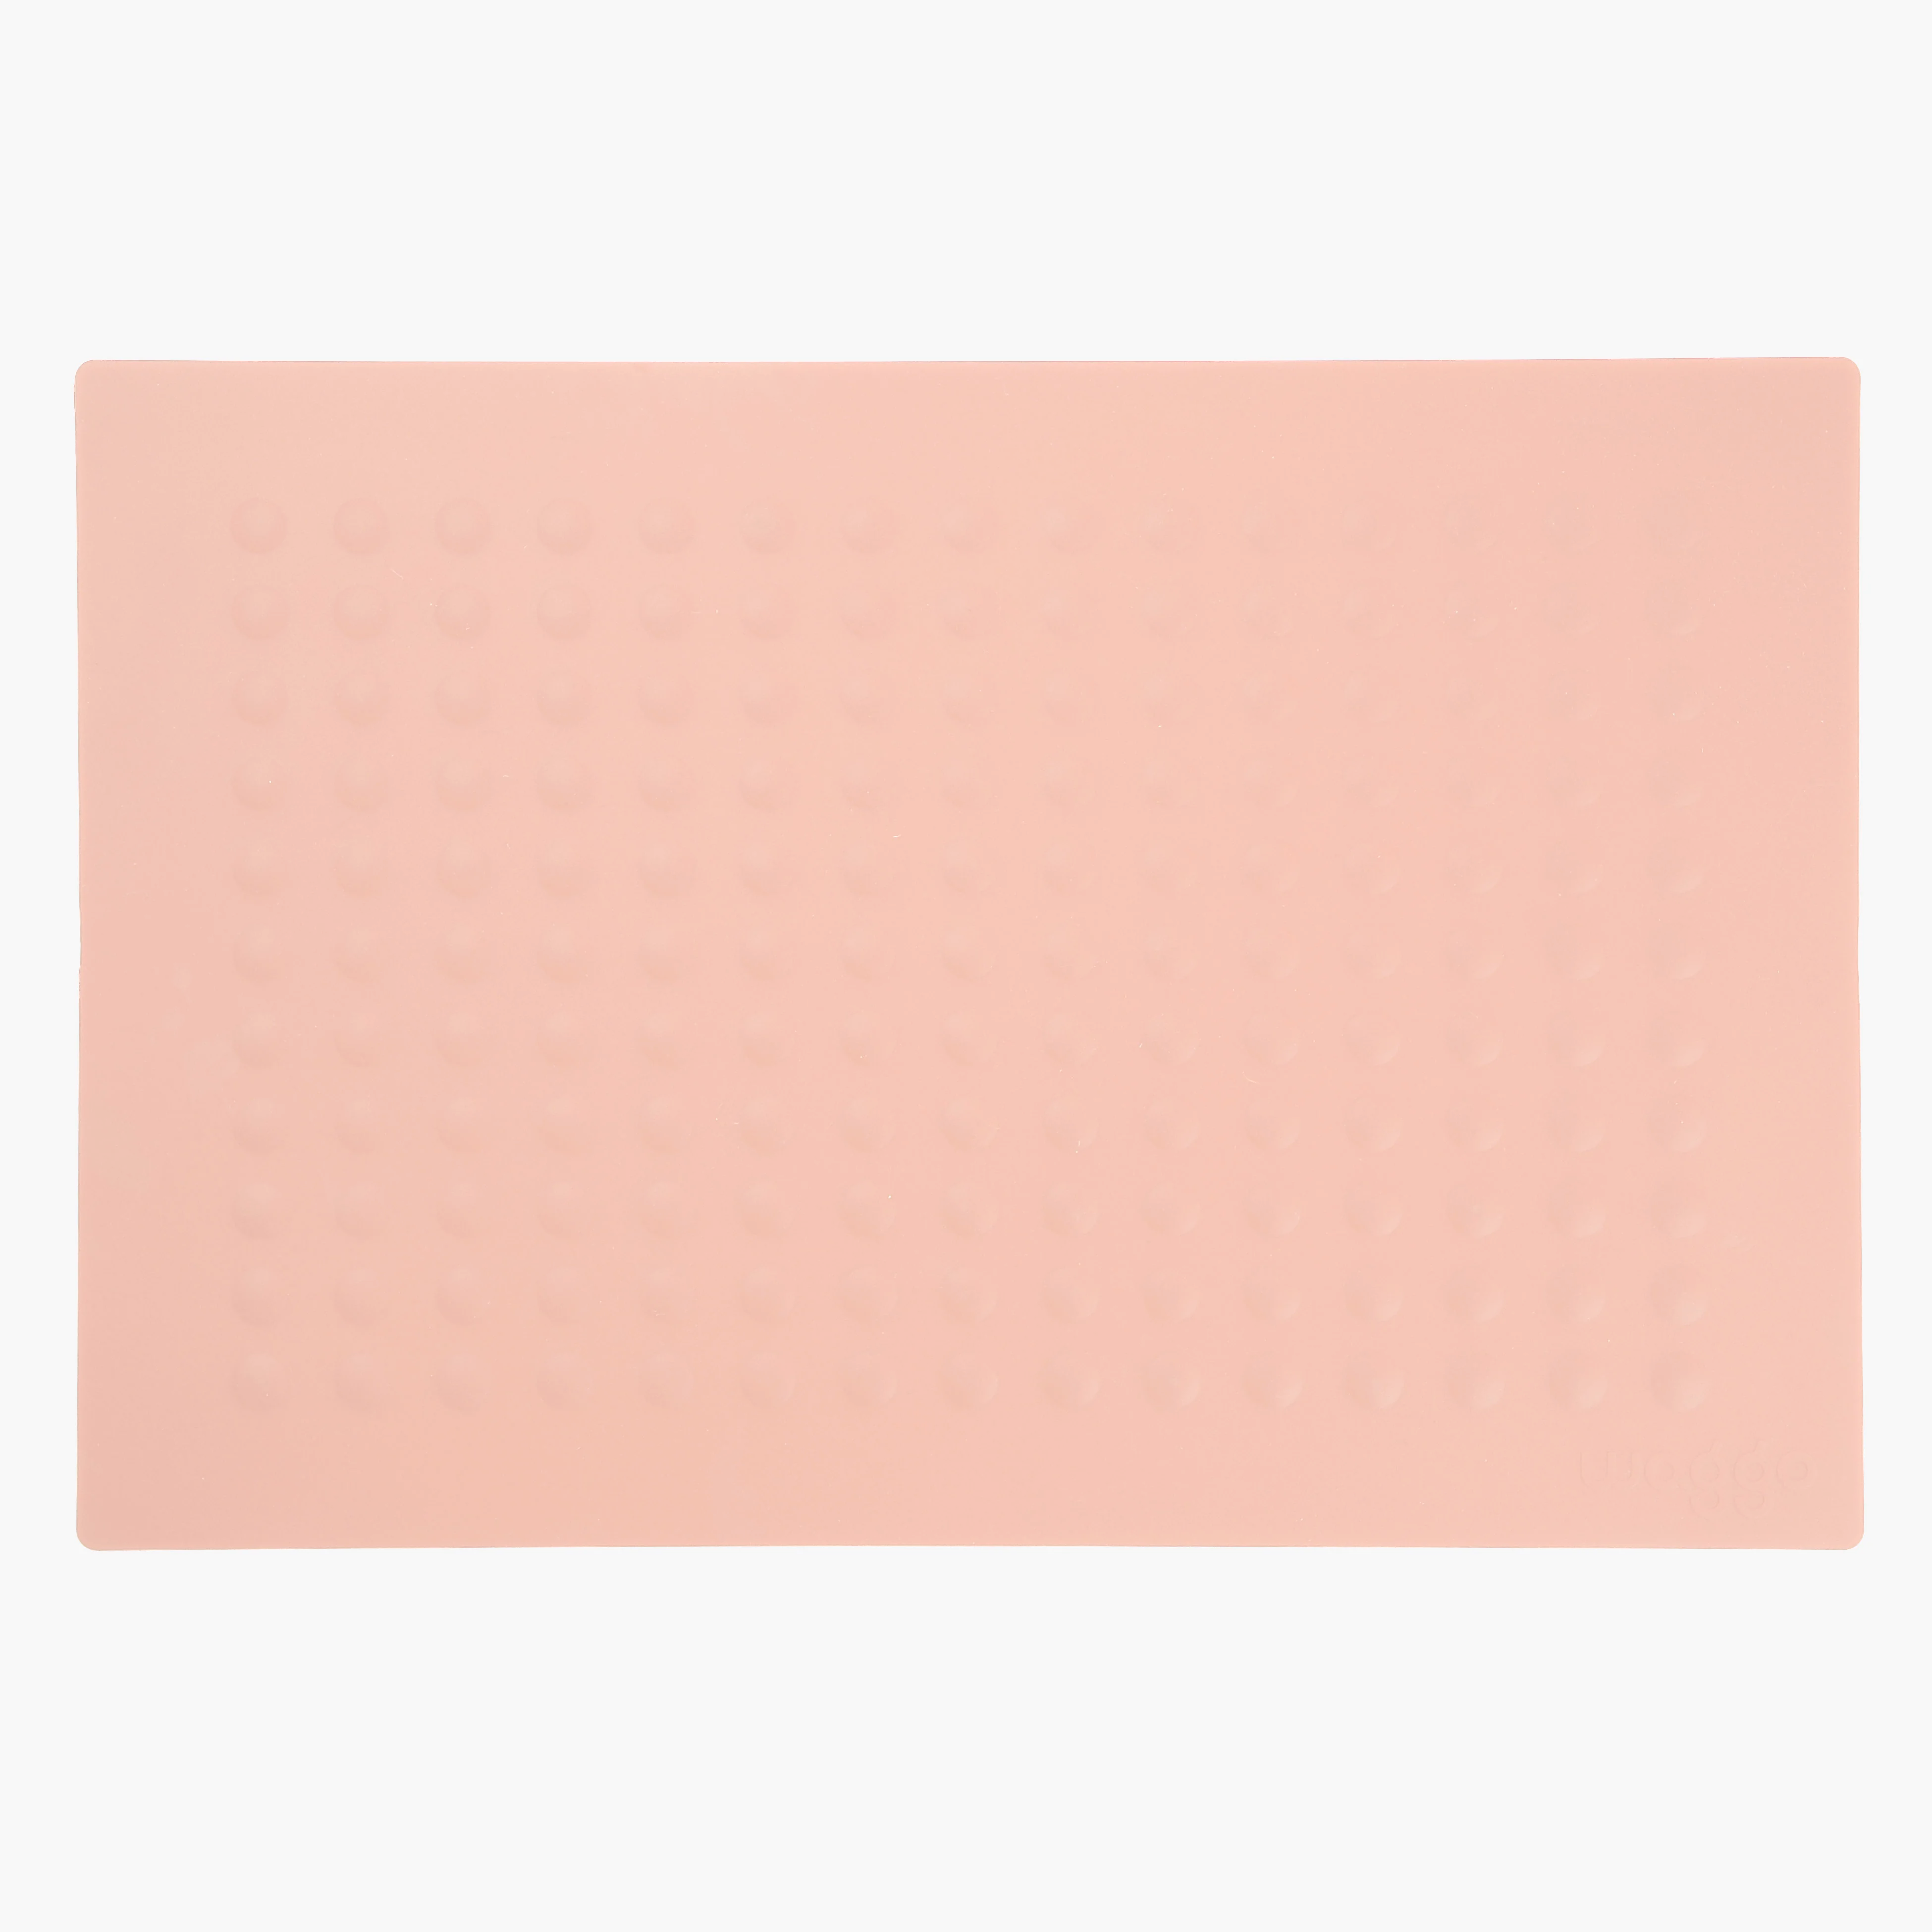 Bubbles Dog Food and Water Placemat, Rose